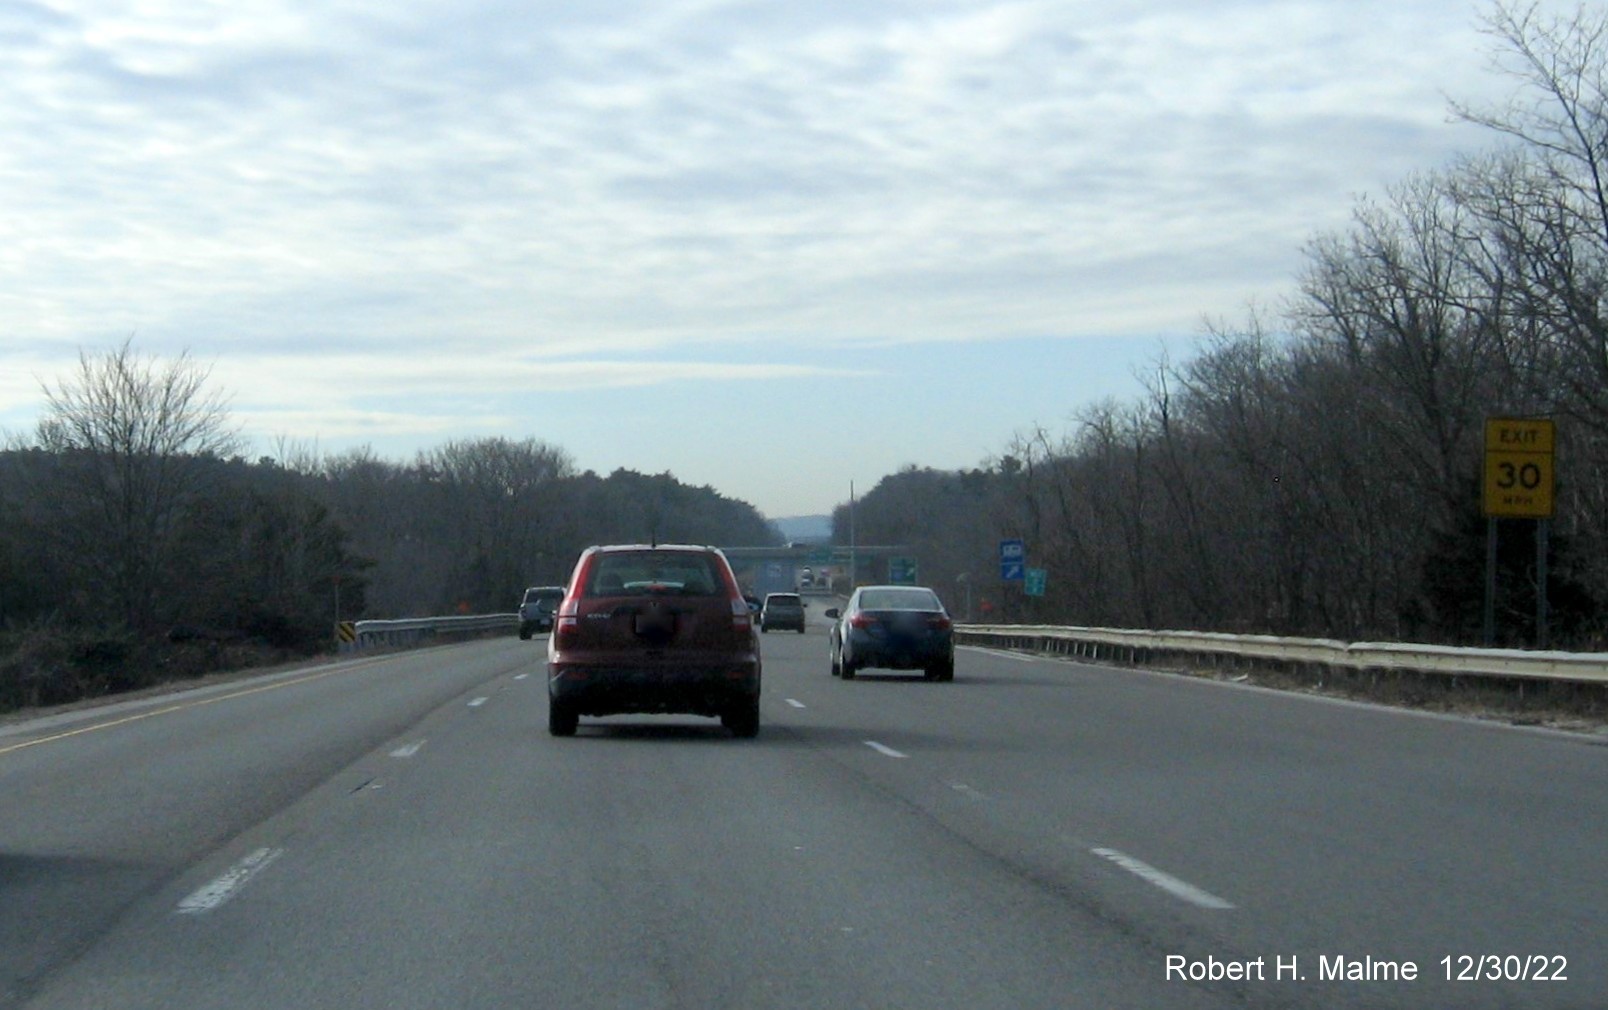 Image of former location of new overhead signs approaching the off-ramp for I-495 North on I-95 South in Foxboro, December 2022